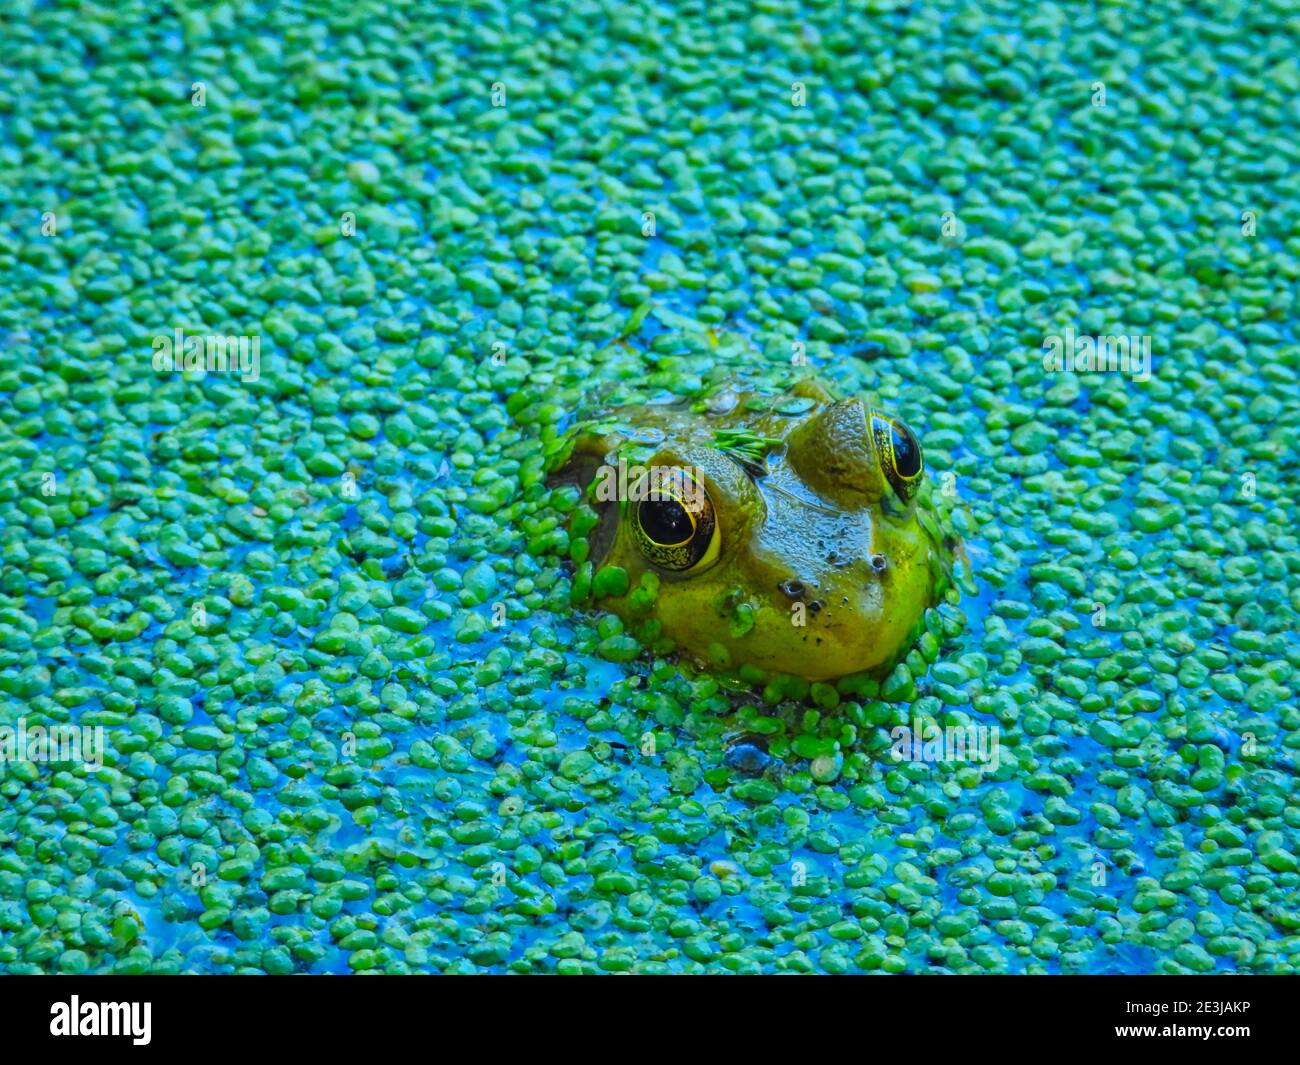 Frog in a pond: An extreme closeup of bullfrog sits looking away in a shallow pond filled with a duckweed growth on the surface Stock Photo